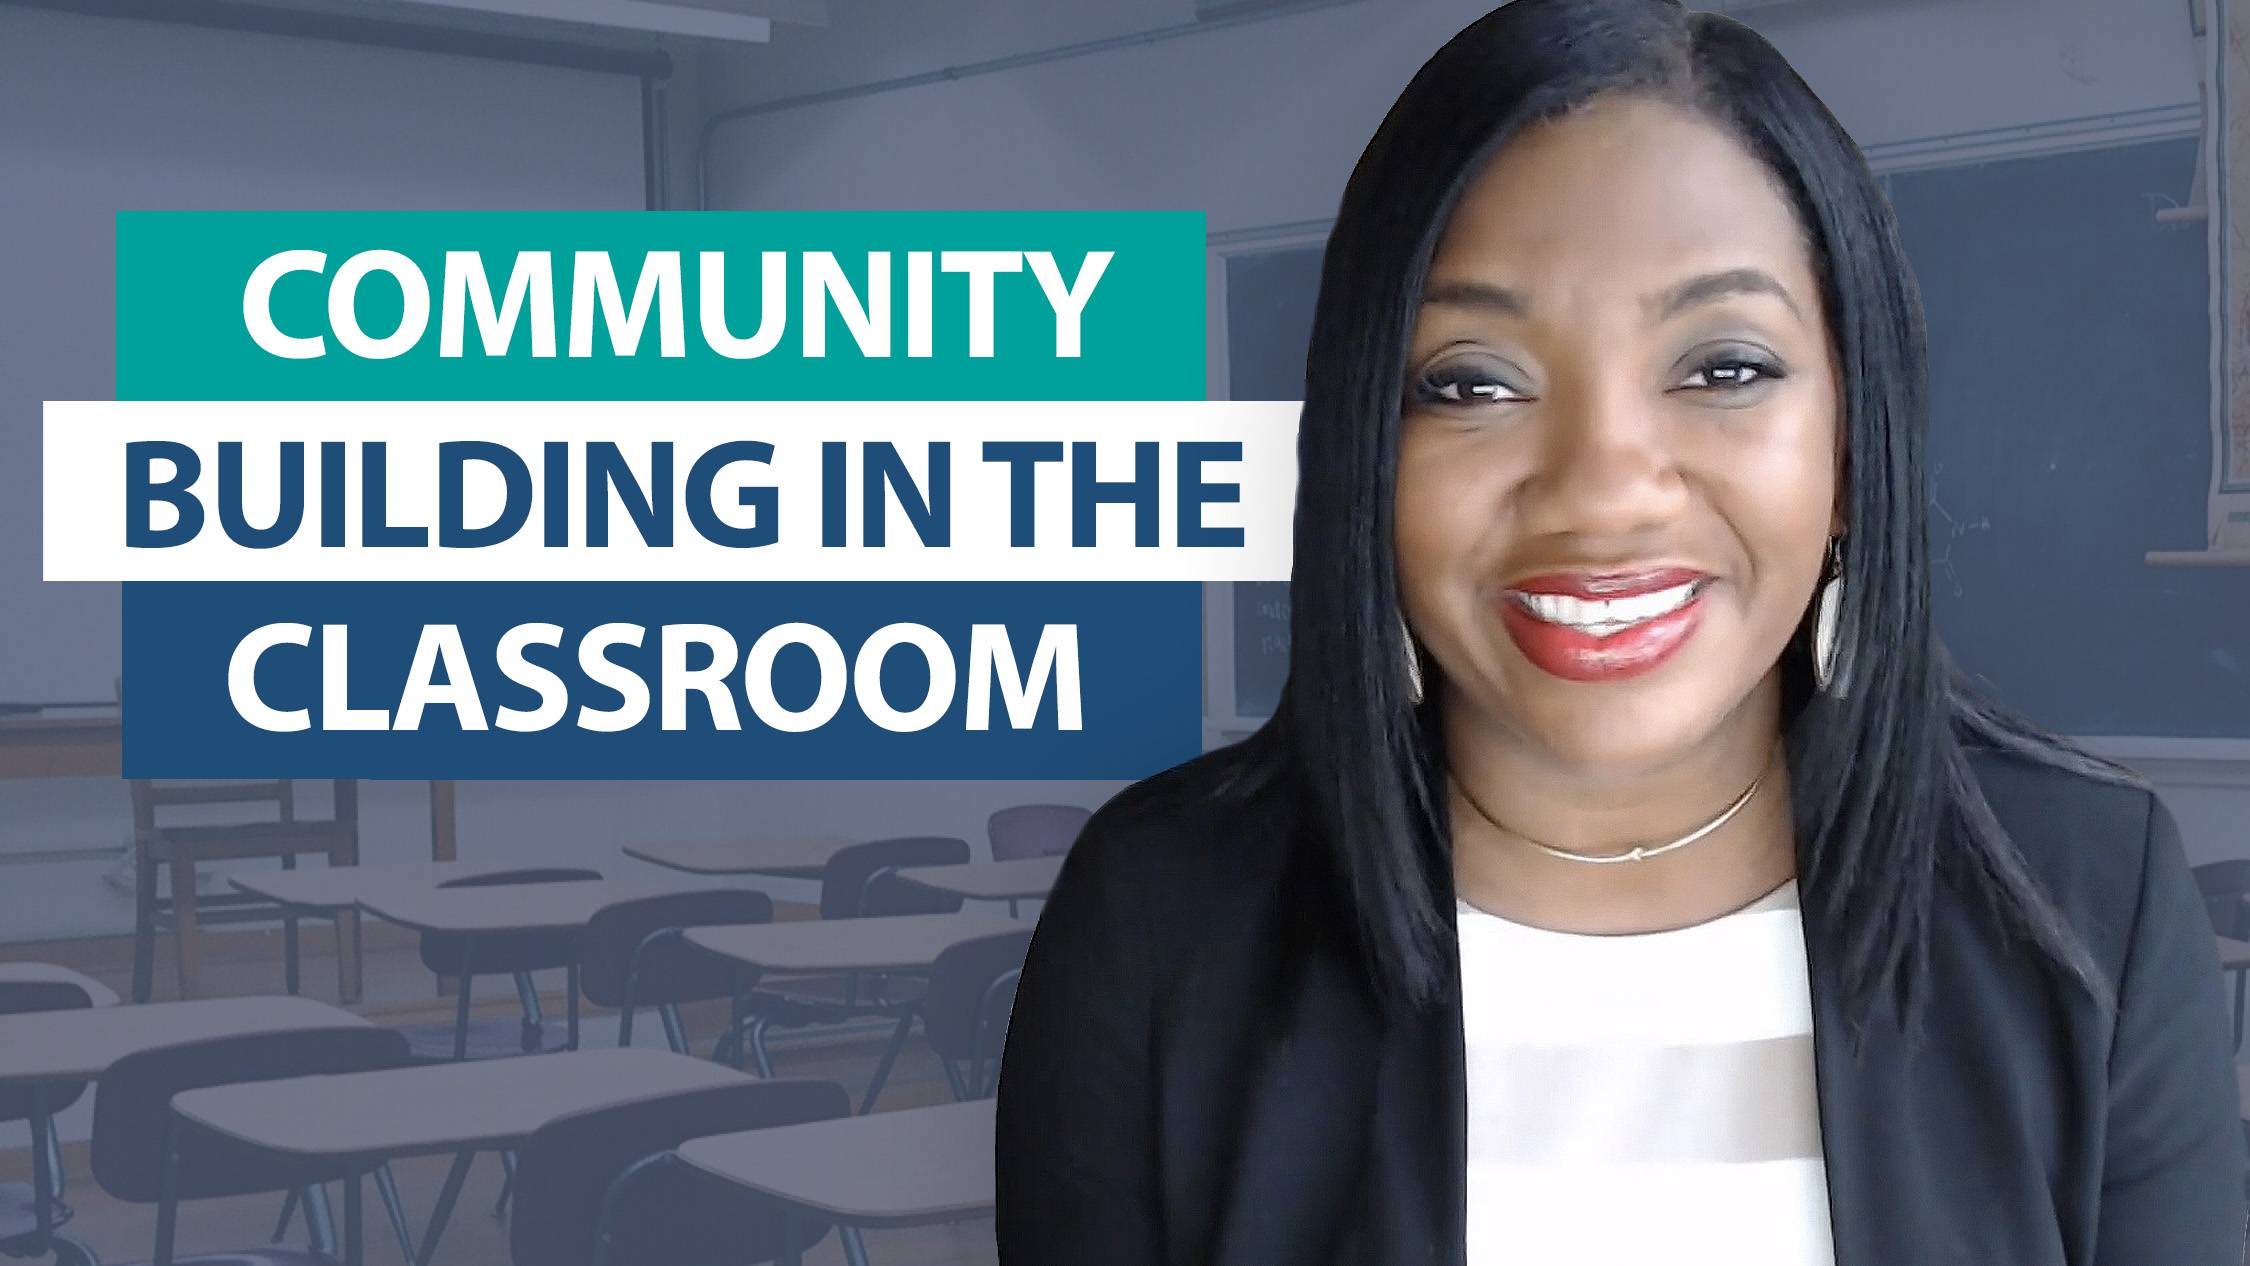 How can I make Community Building Part of My Classroom